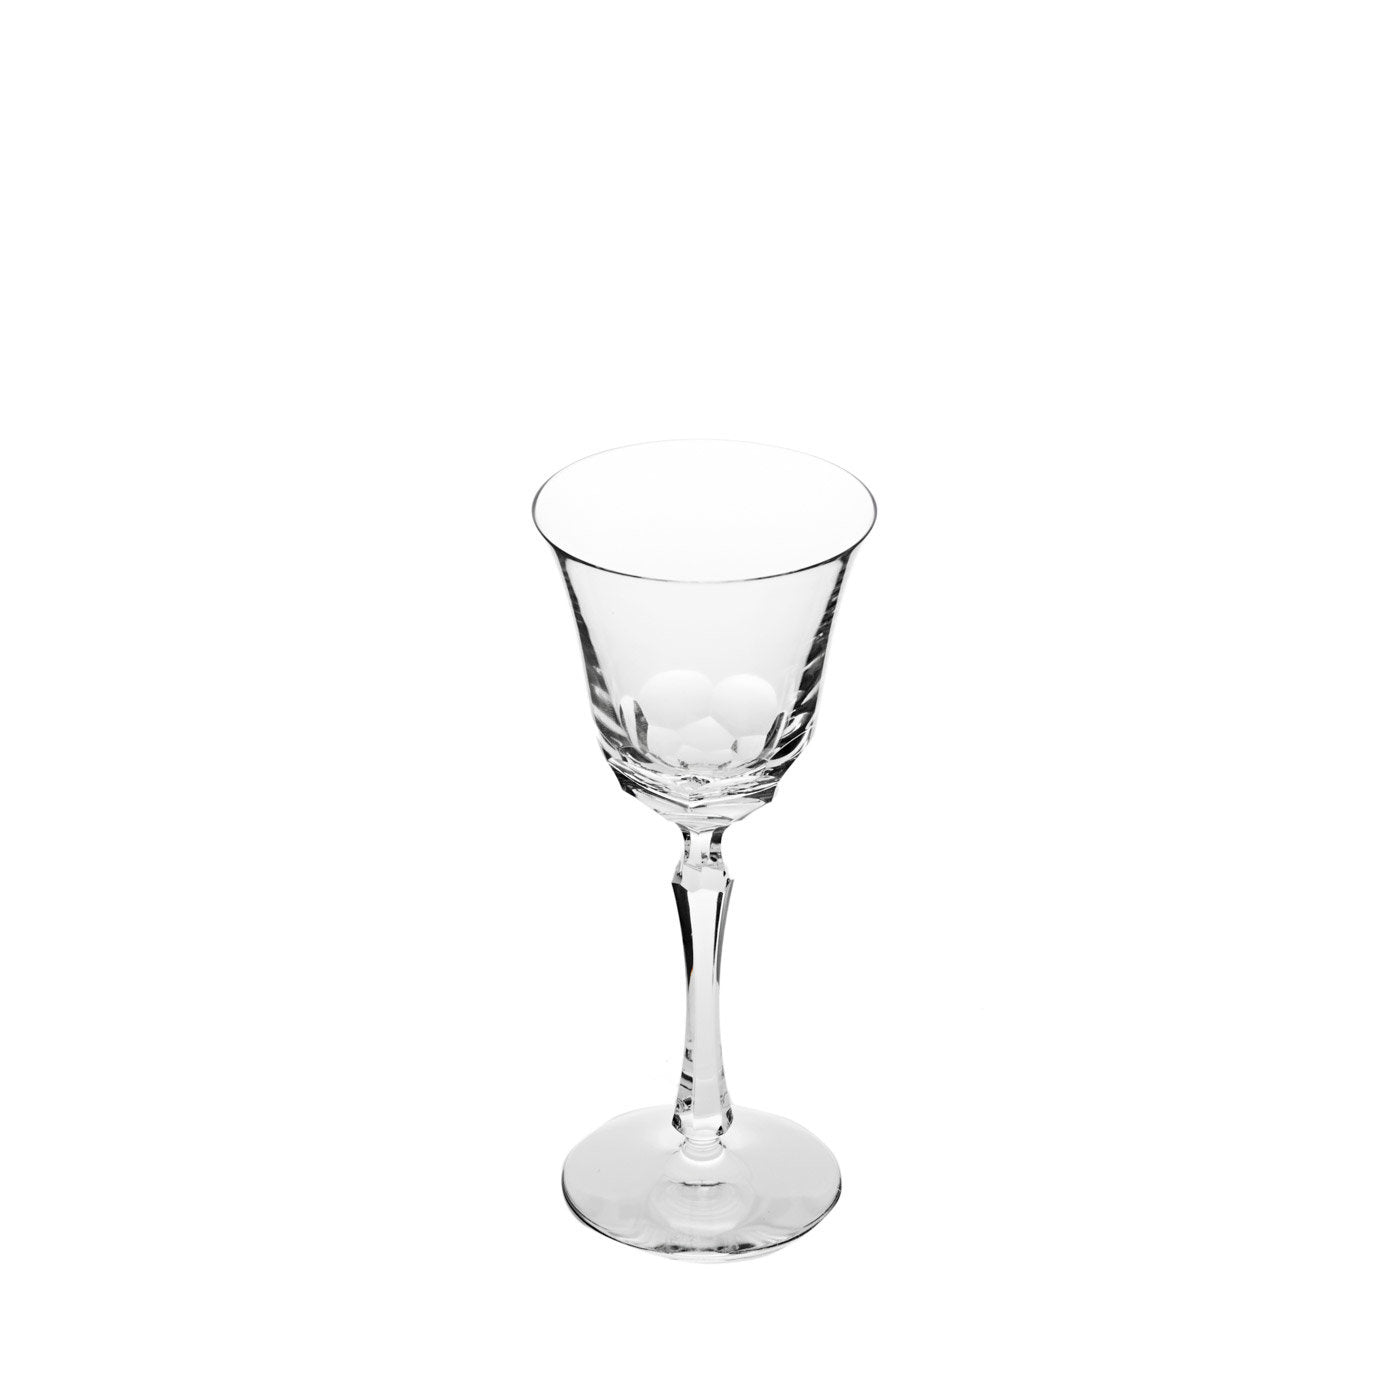 Set of 6 Narciso Crystal Water Glasses - Alternative view 1